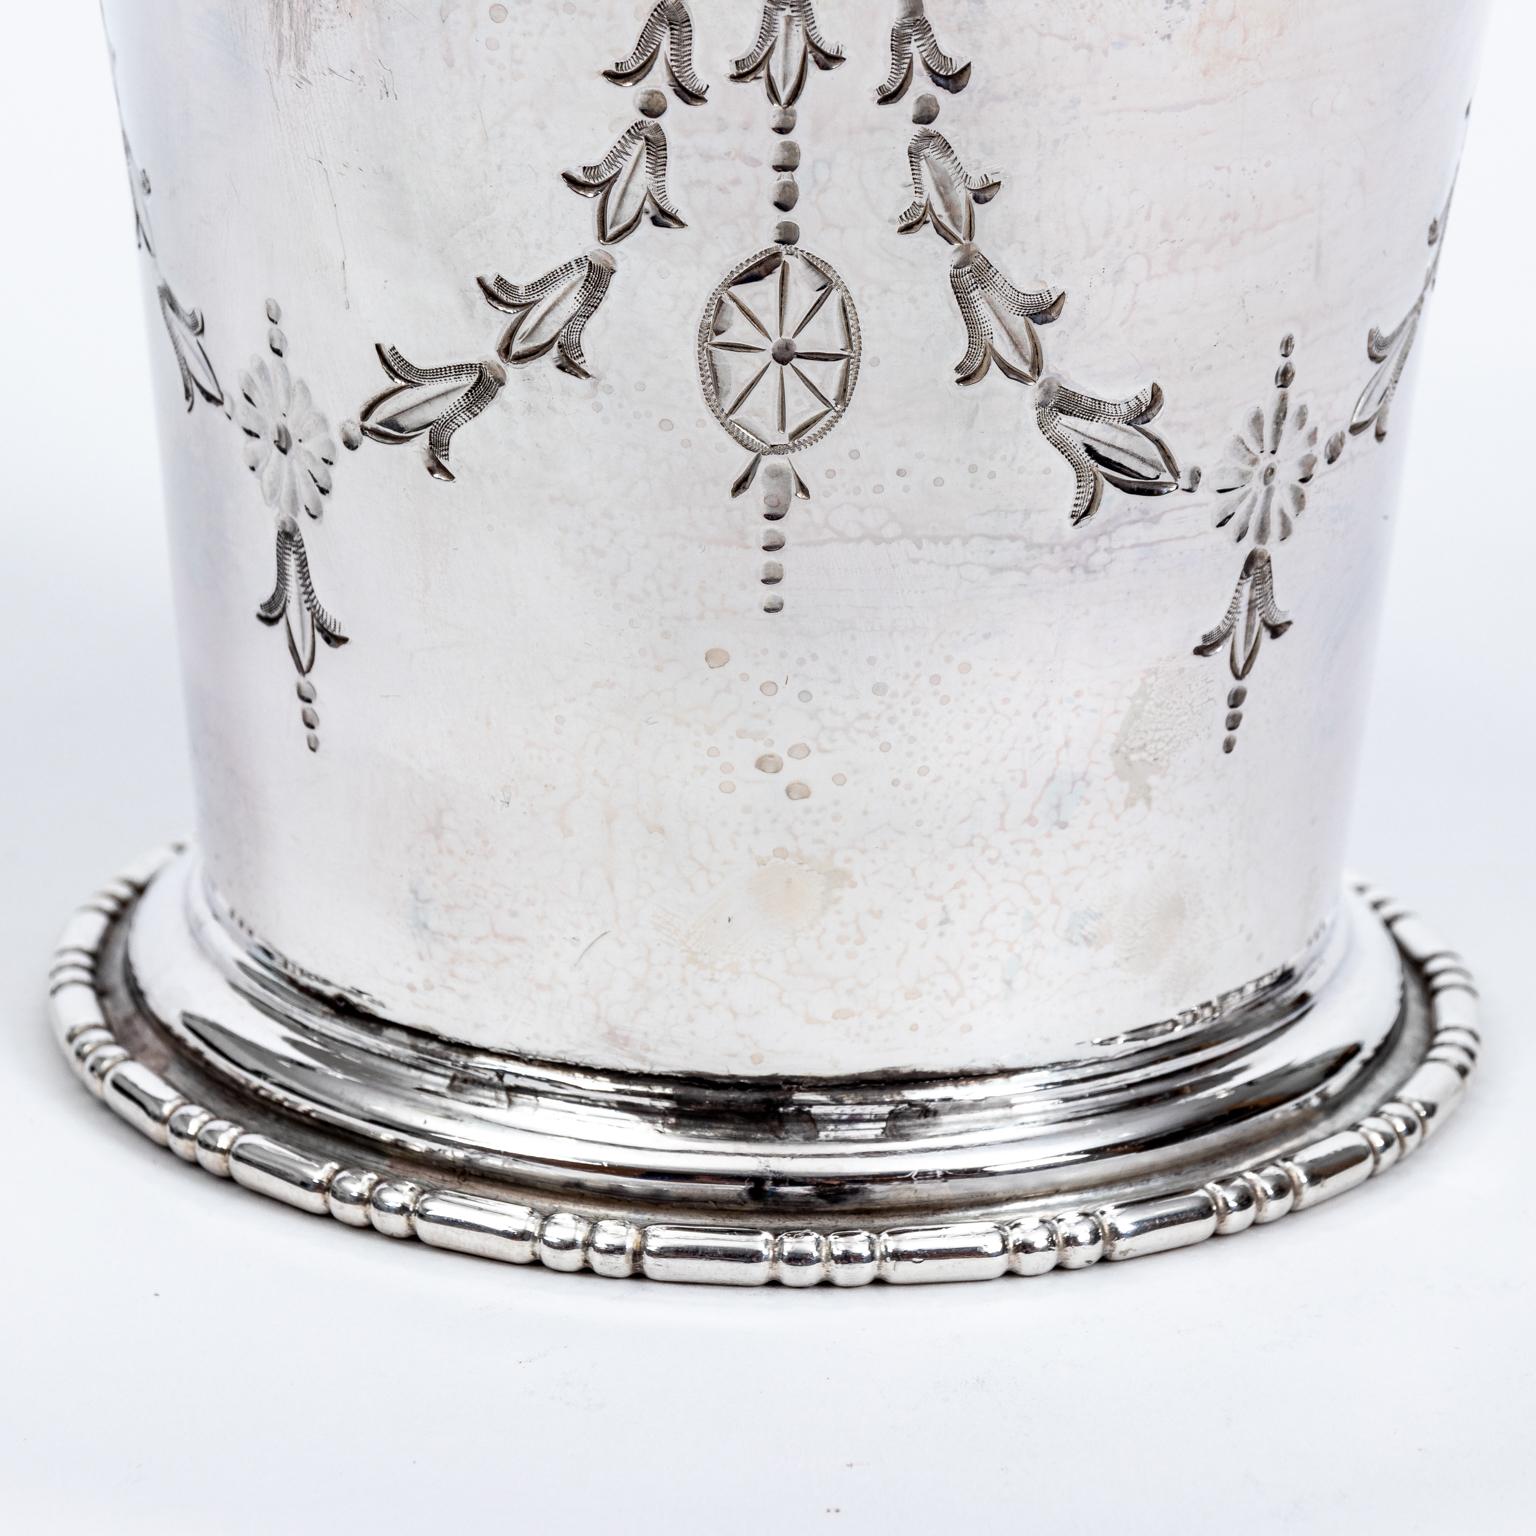 Circa 1900s Edwardian Scottish silver plate cache pot, elaborately detailed with Roman swags of bellflowers and ribbon bows on the exterior along with bead-and-reel trim on the top rim and base of the pot. Made in Scotland. Please note of wear